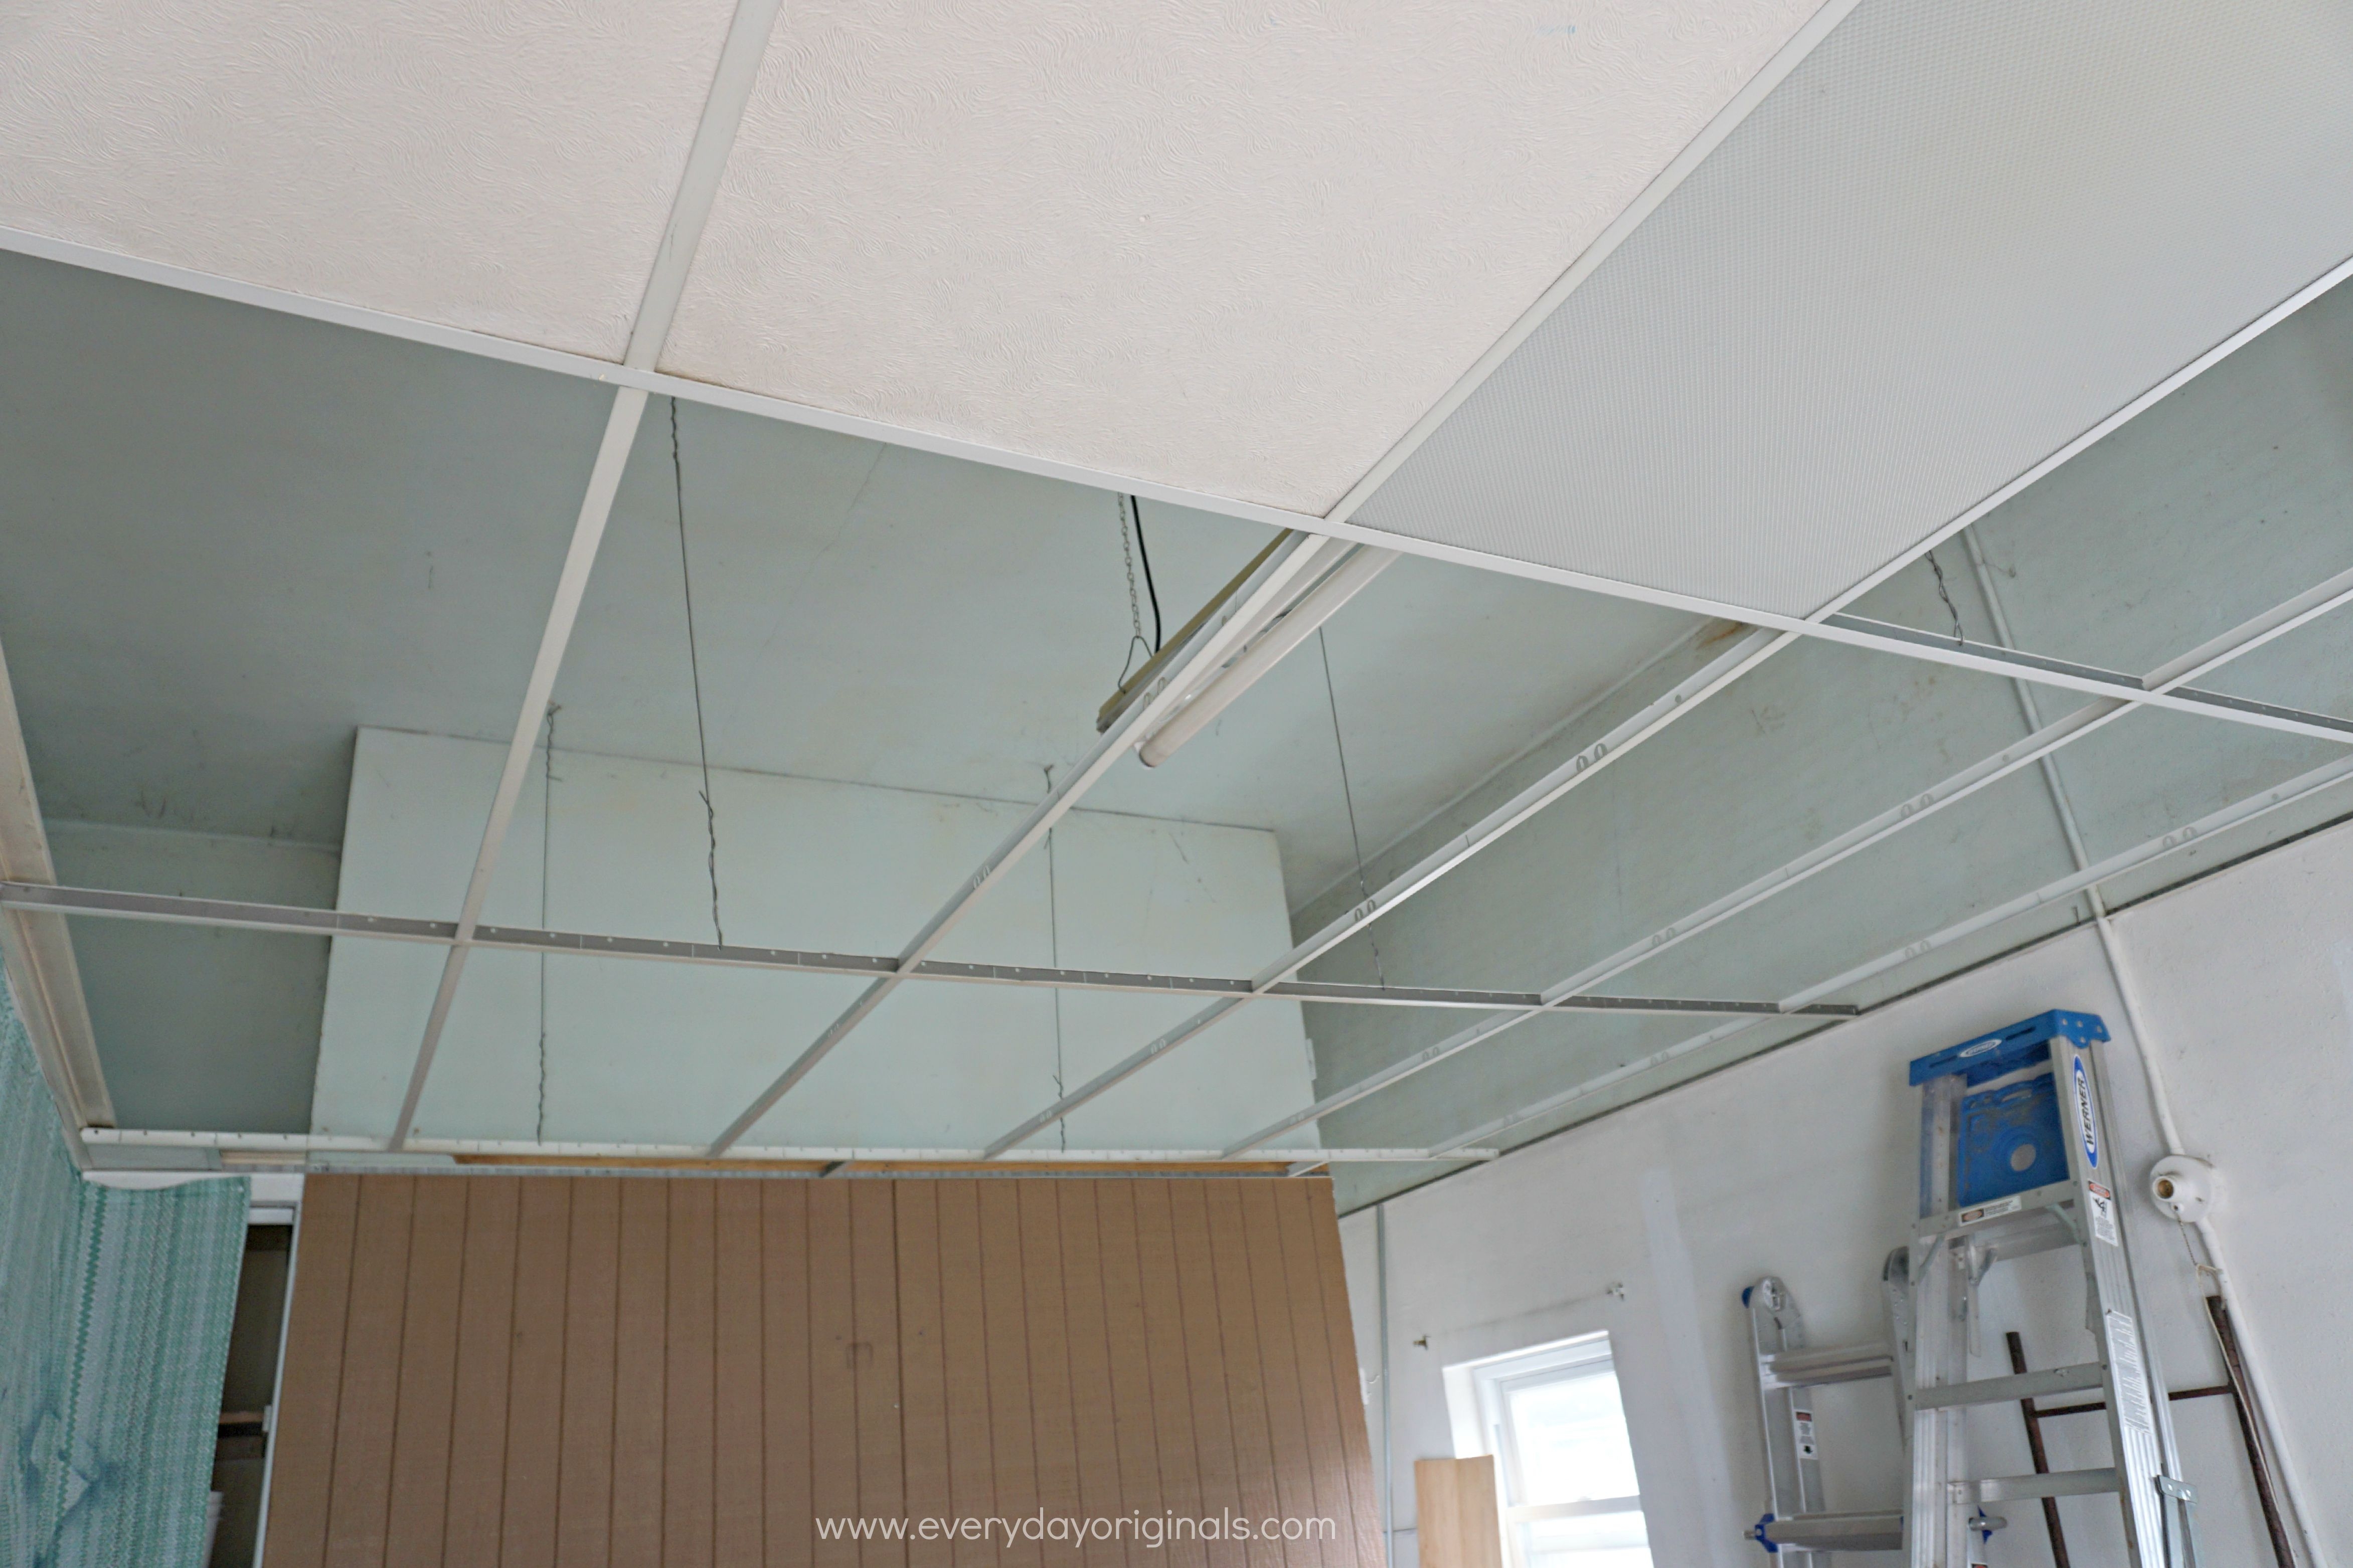 Garage Drop Ceiling Tiles Garage Drop Ceiling Tiles converting a closed up garage back to a garage 4692 X 3127